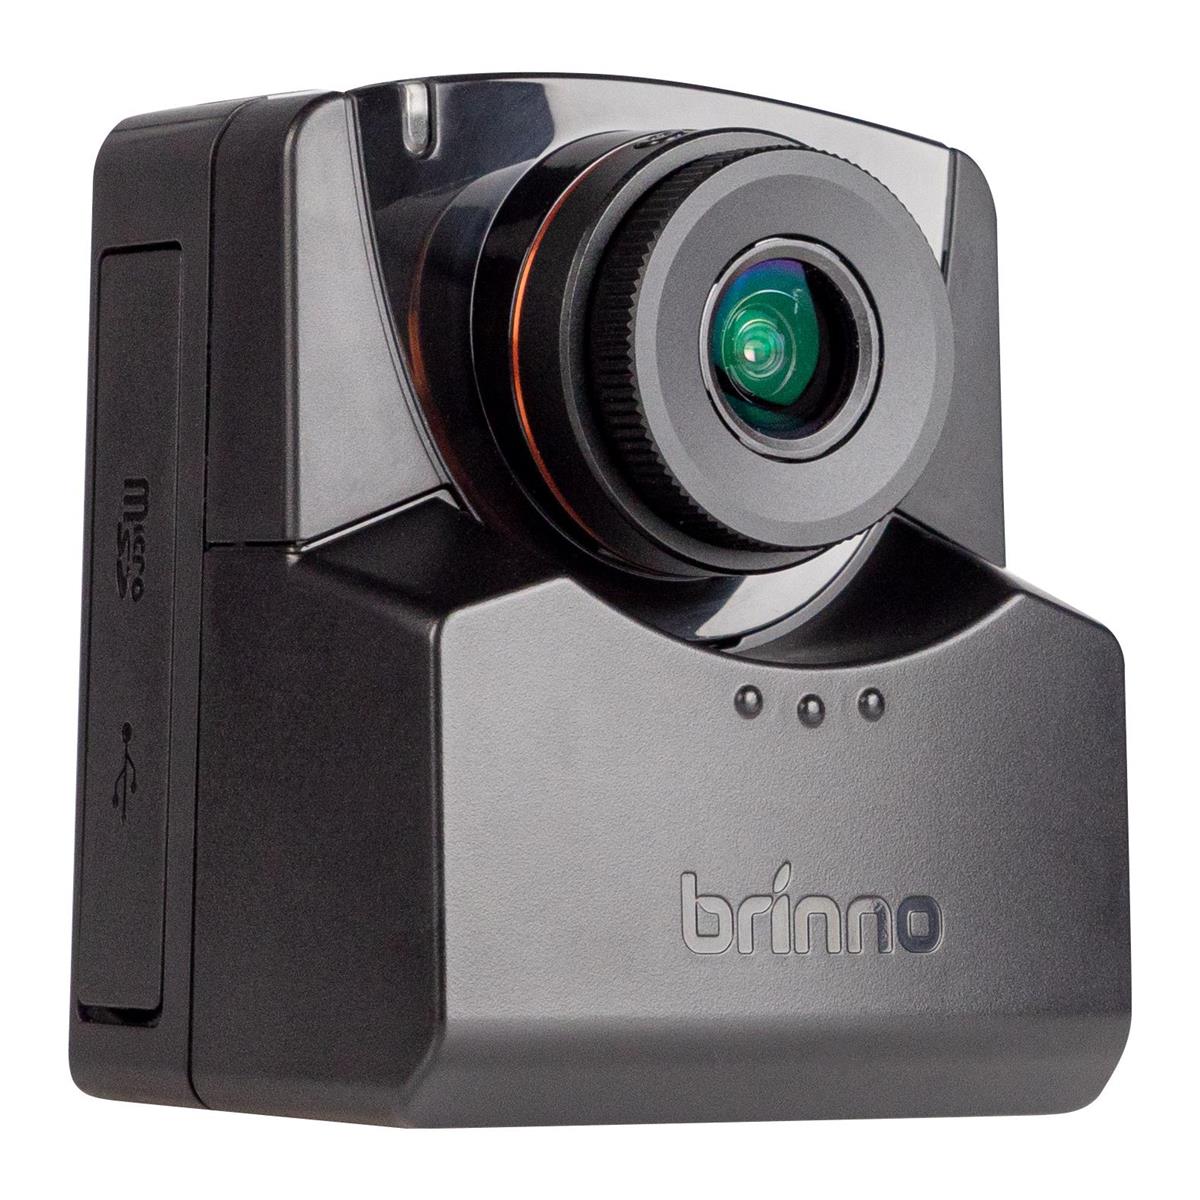 Brinno Empower TLC2020 Time Lapse Camera 4th Generation HDR FHD with microSD Card 4 AA Battery Lens Cover for Step Video Stop Motion Still Photo